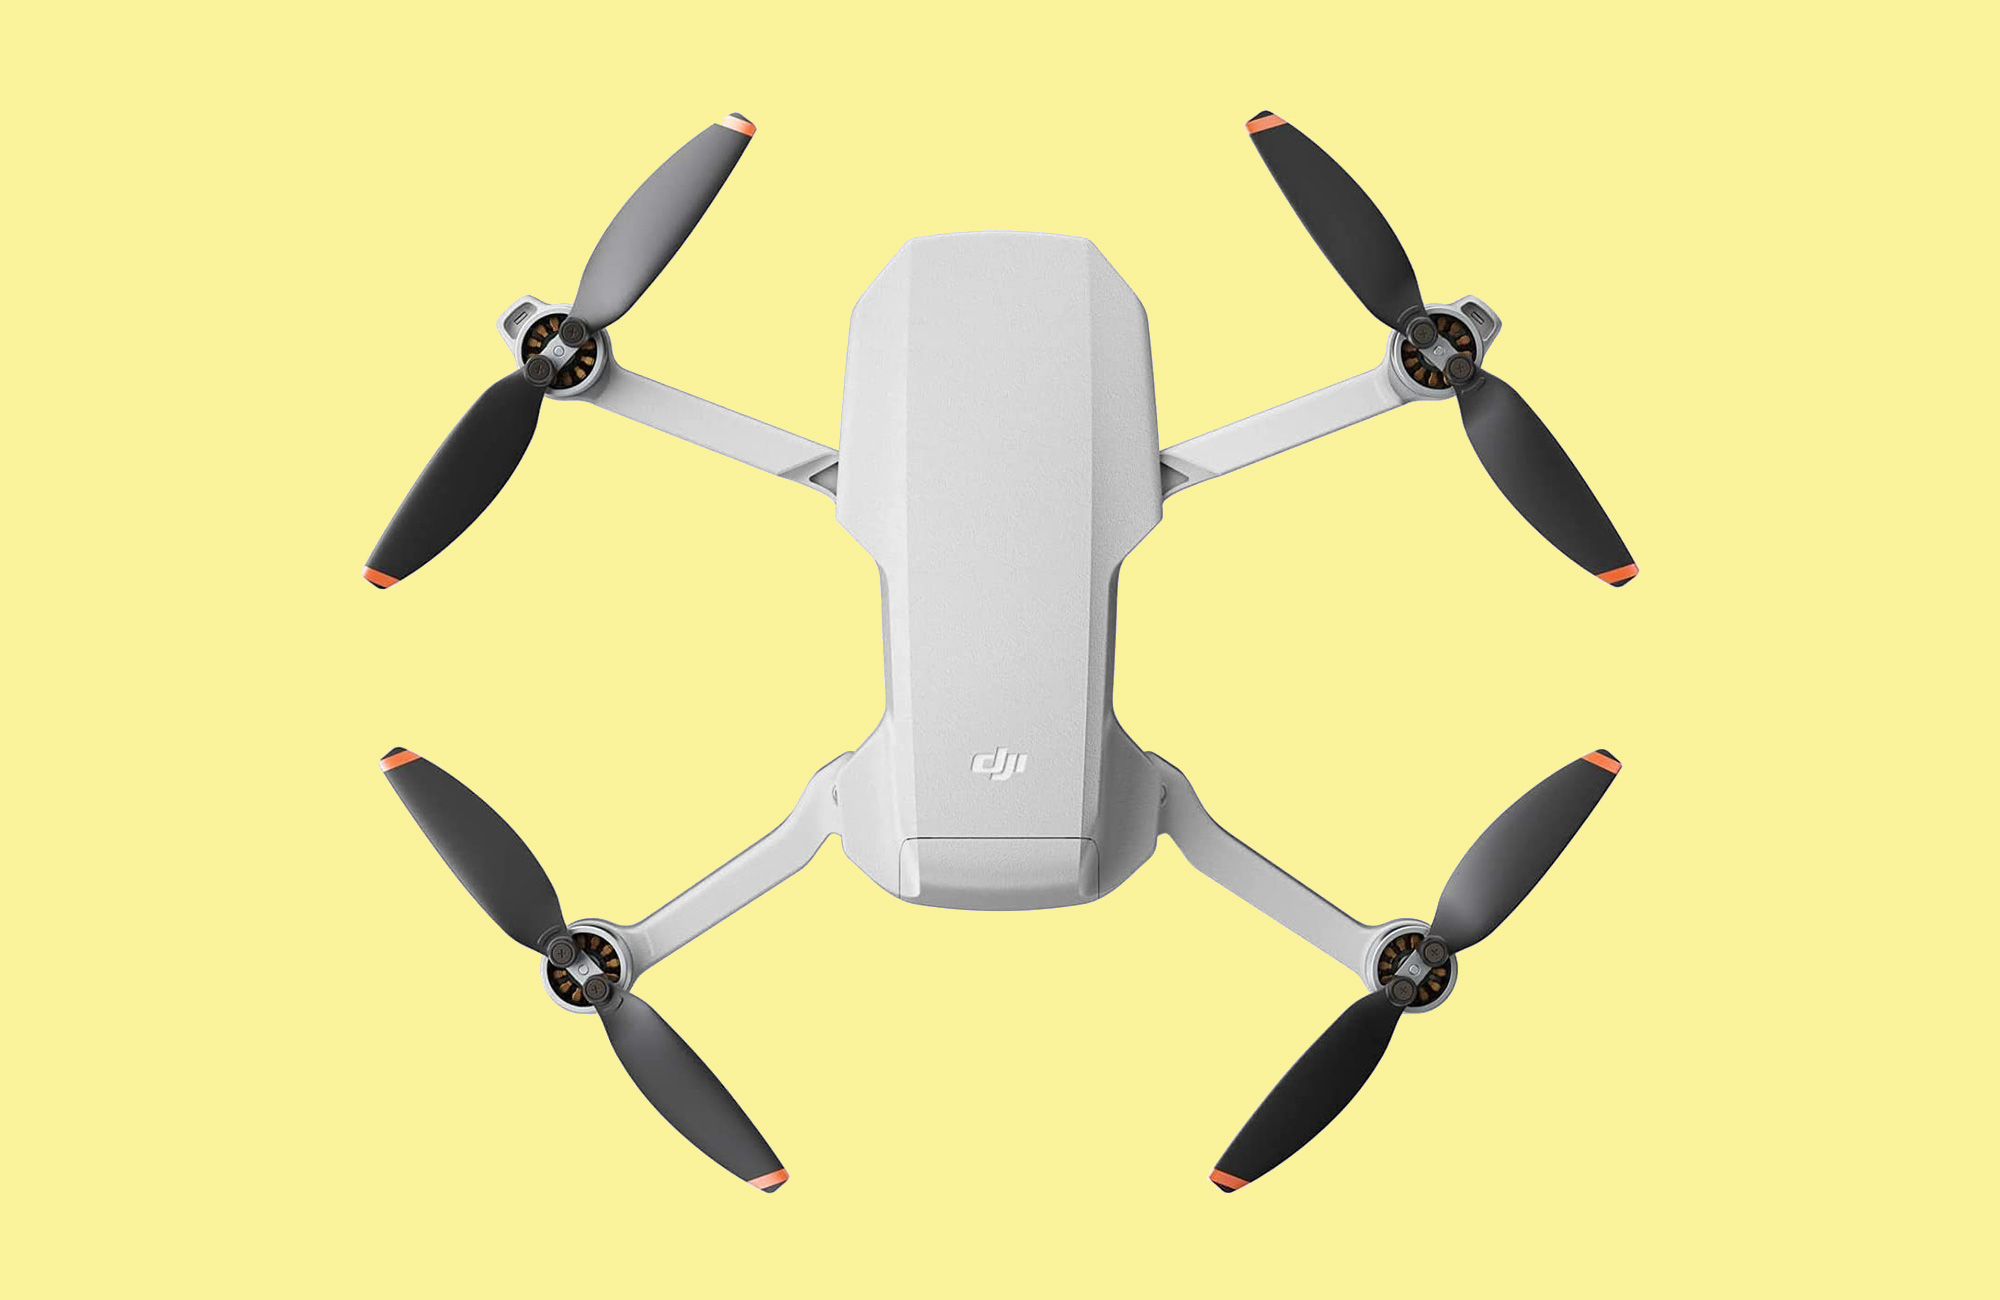 What Makes Tello the Most Fun Drone Ever - DJI Guides